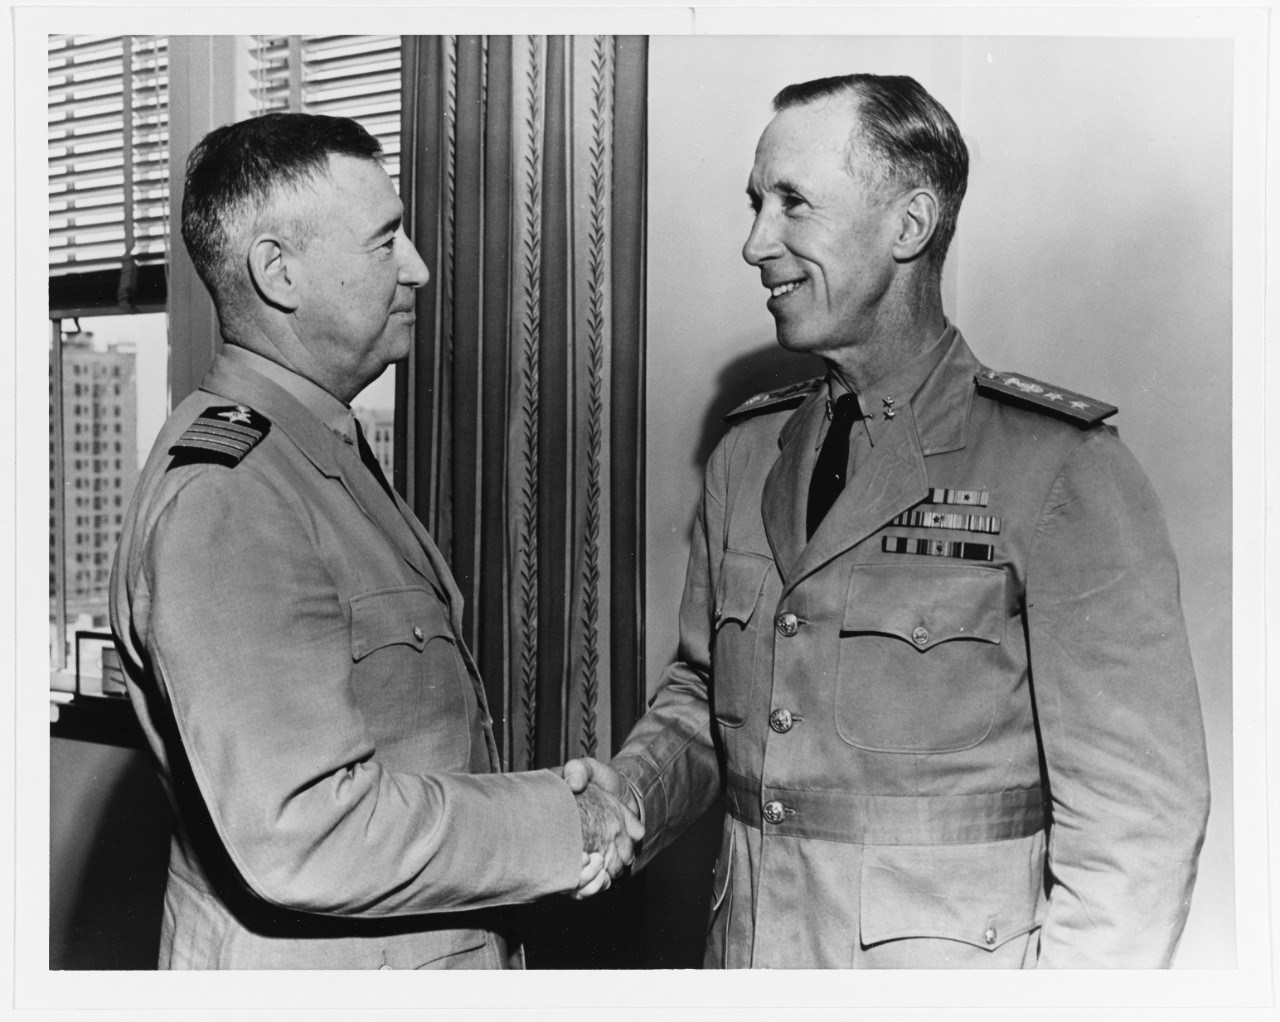 Rear Admiral Walter S. Anderson, USN, greeted by Captain H.H.J. Benson, USN, July 1944.